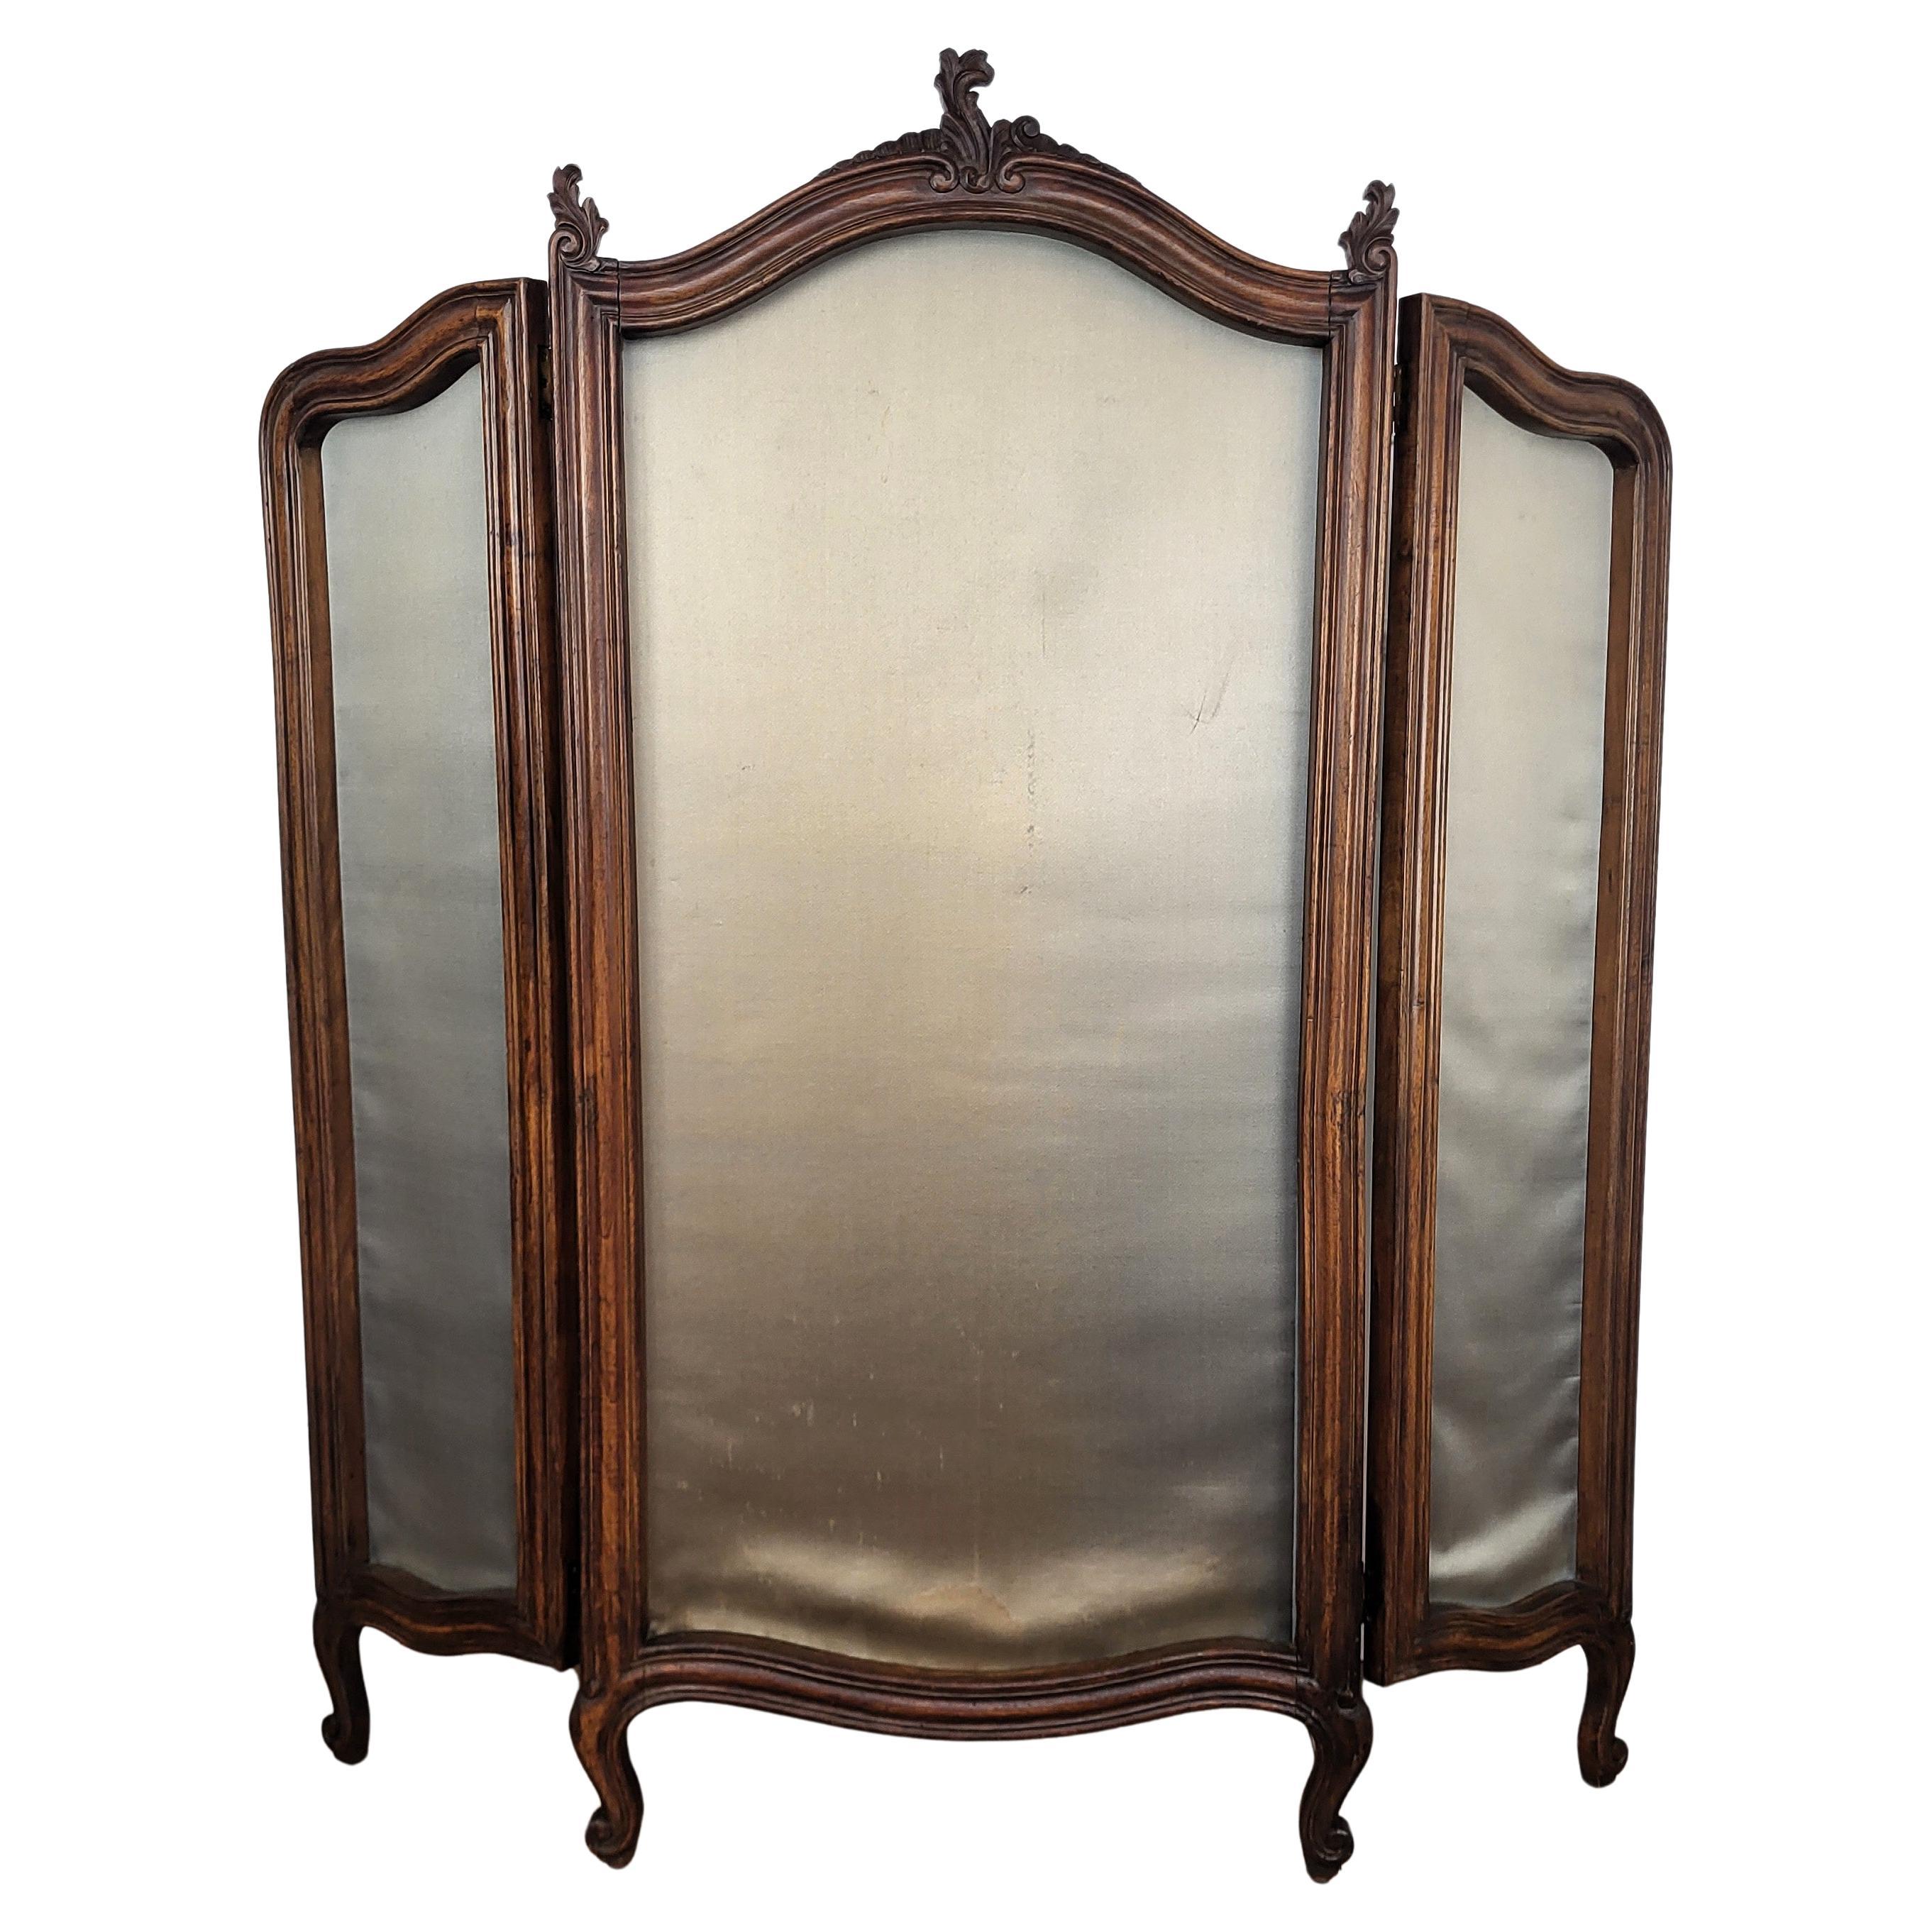 Antique Italian Classical Carved Wood Fabric 3 Panel Folding Screen Room Divider For Sale